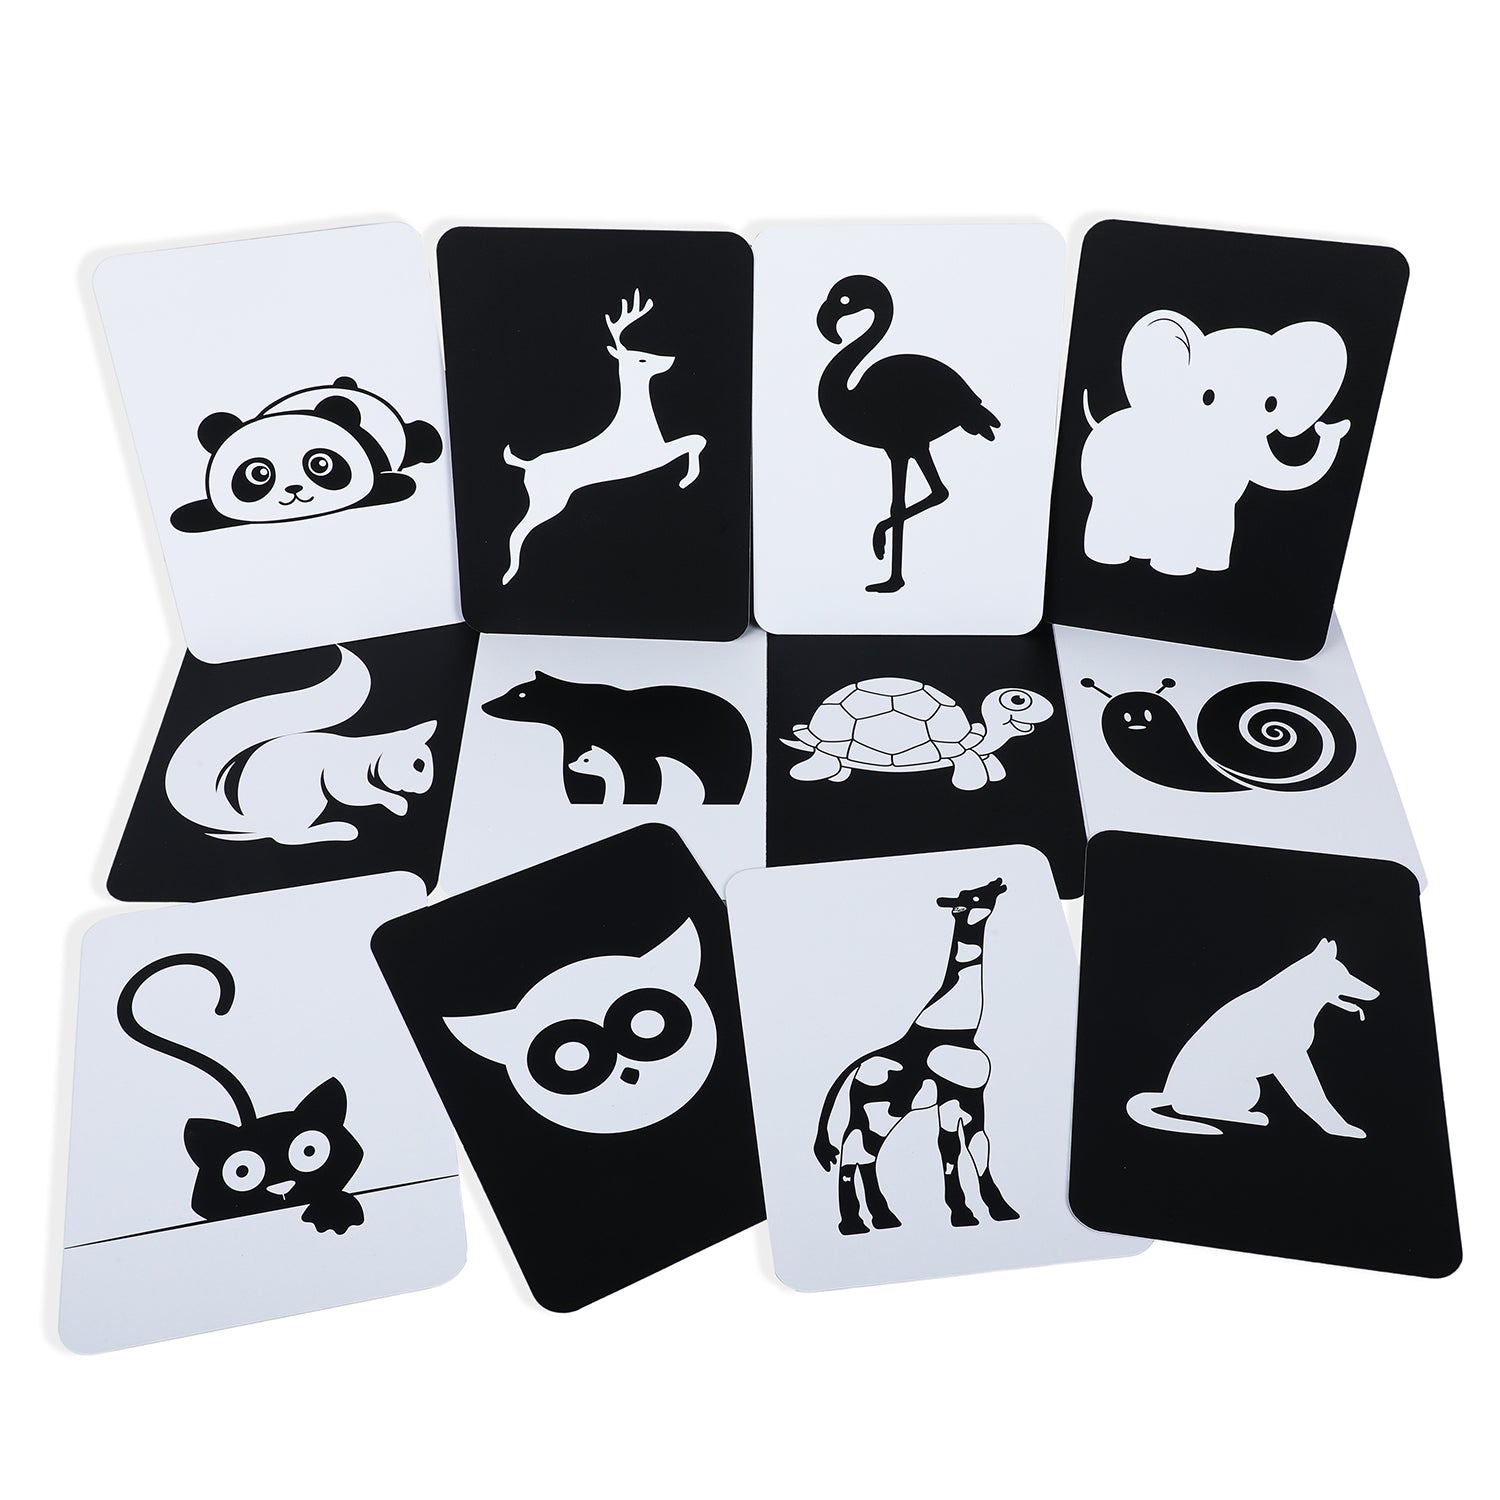 Baby Moo High Contrast Flash Cards Pack of 12 - Animals - Baby Moo